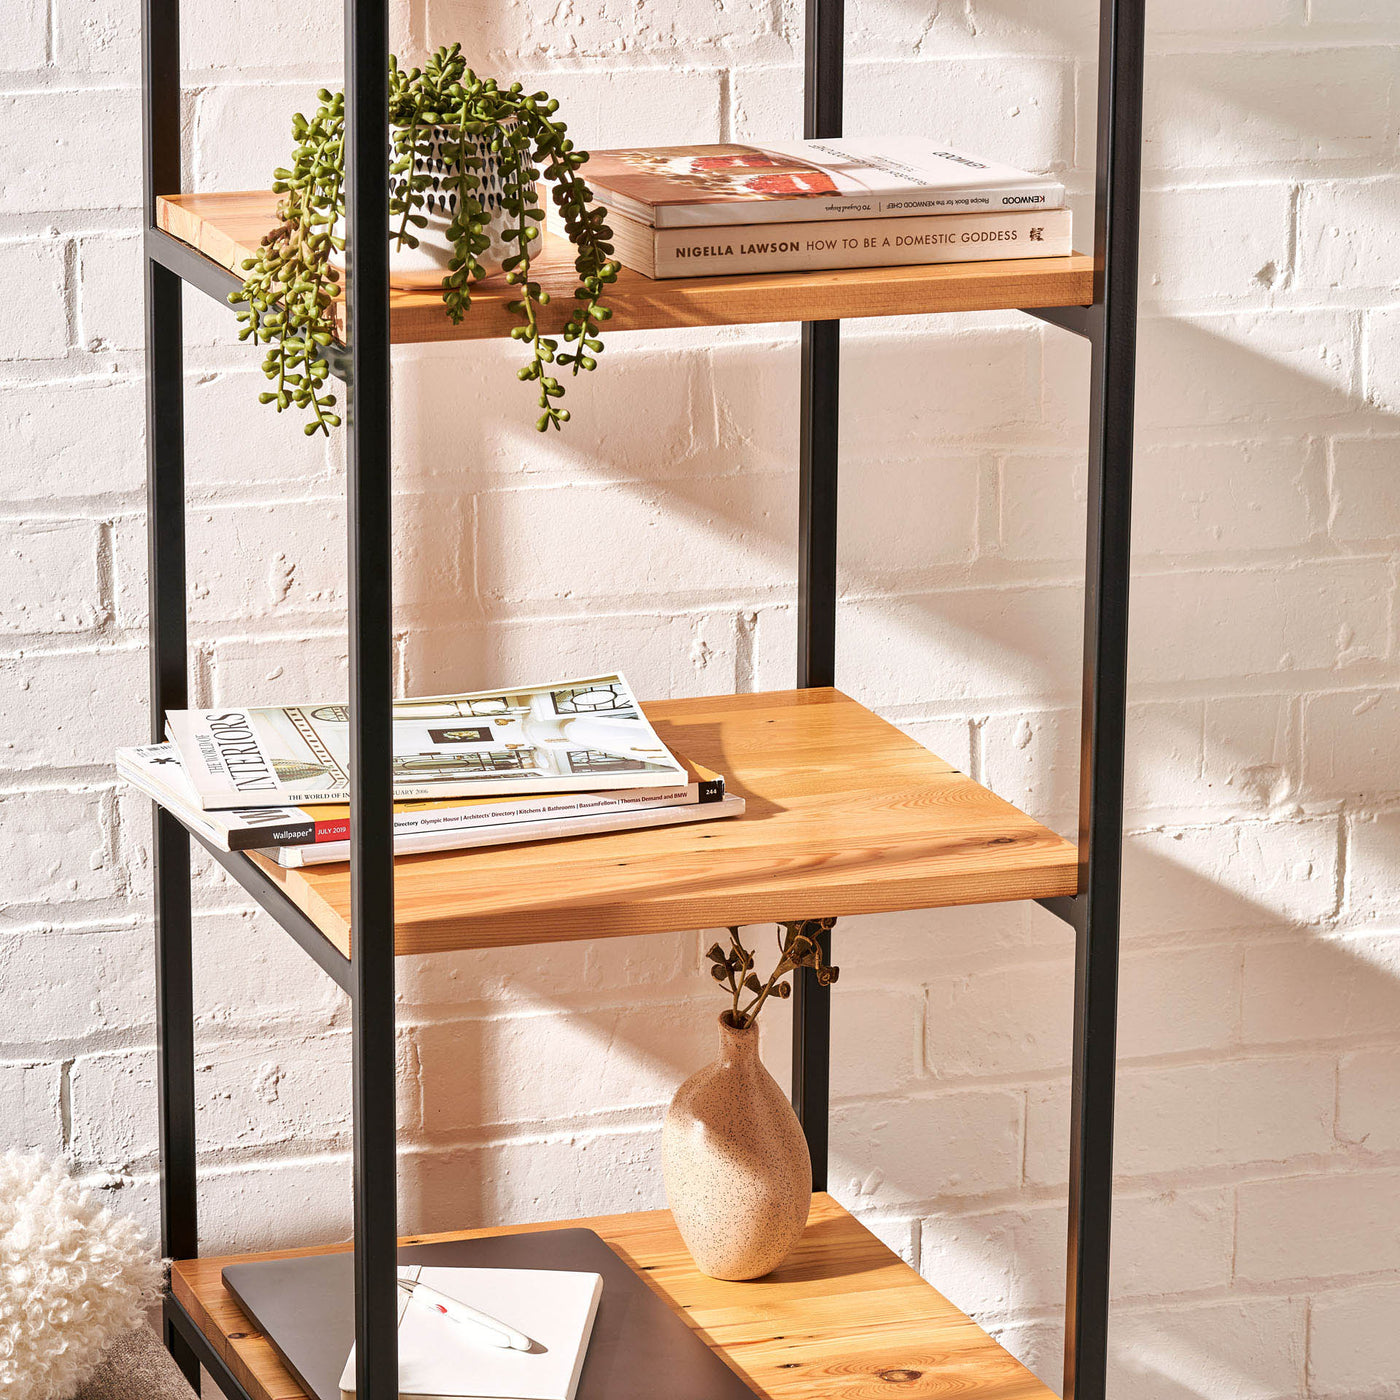 Handcrafted 180cm Tall Narrow Shelving Storage and Display Unit with 5 Shelves and Metal Frame